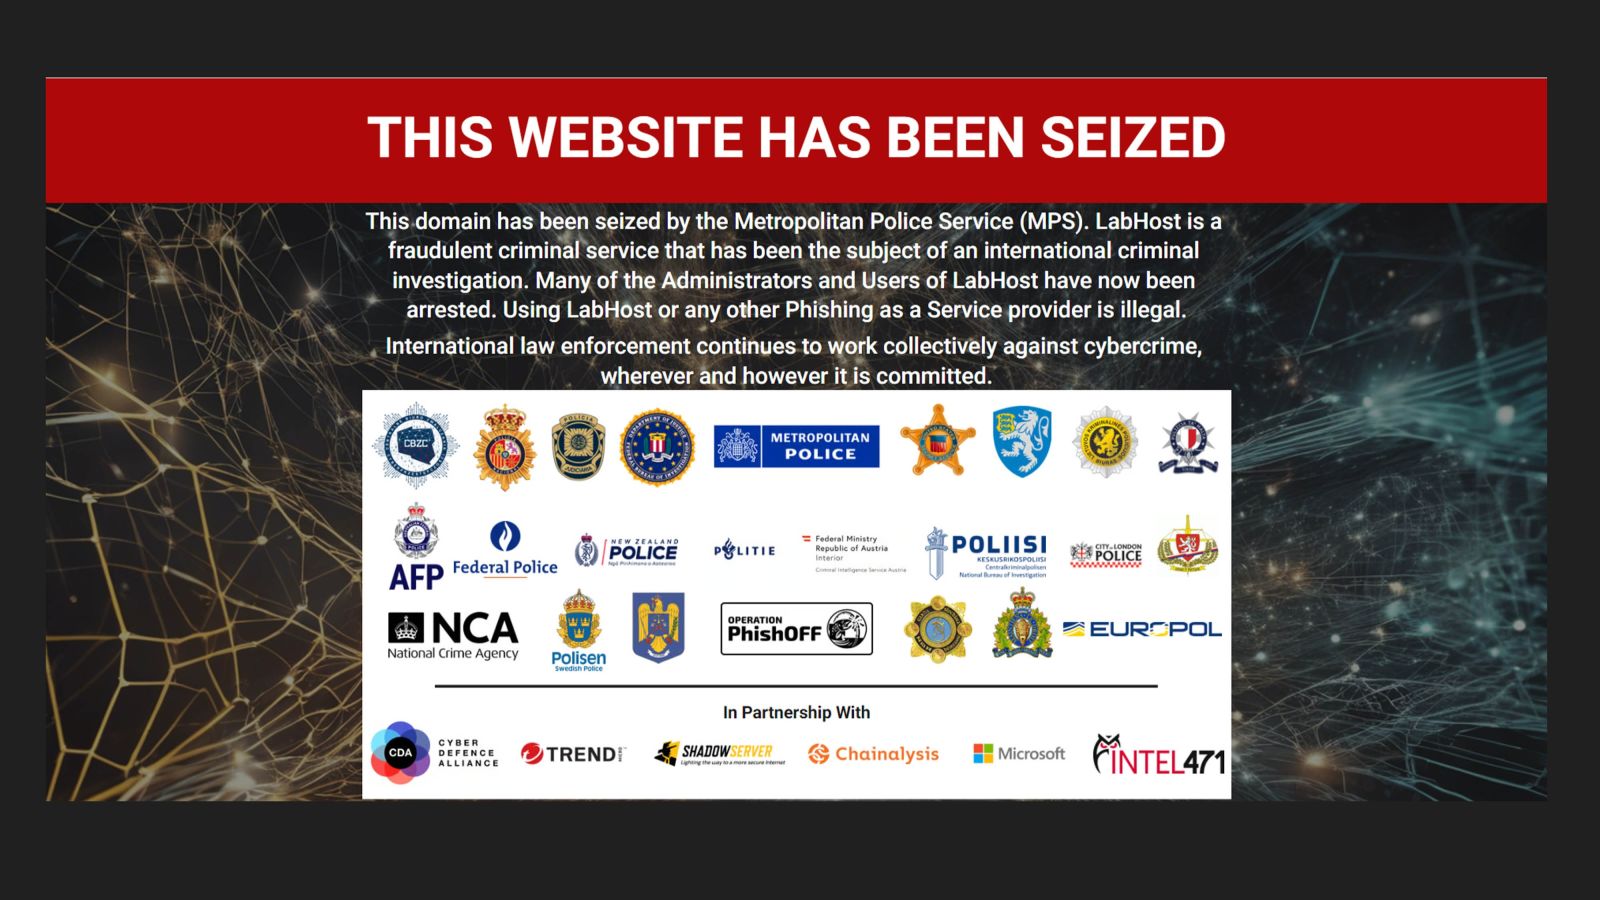 Dozens arrested and thousands of victims contacted after scam site taken offline